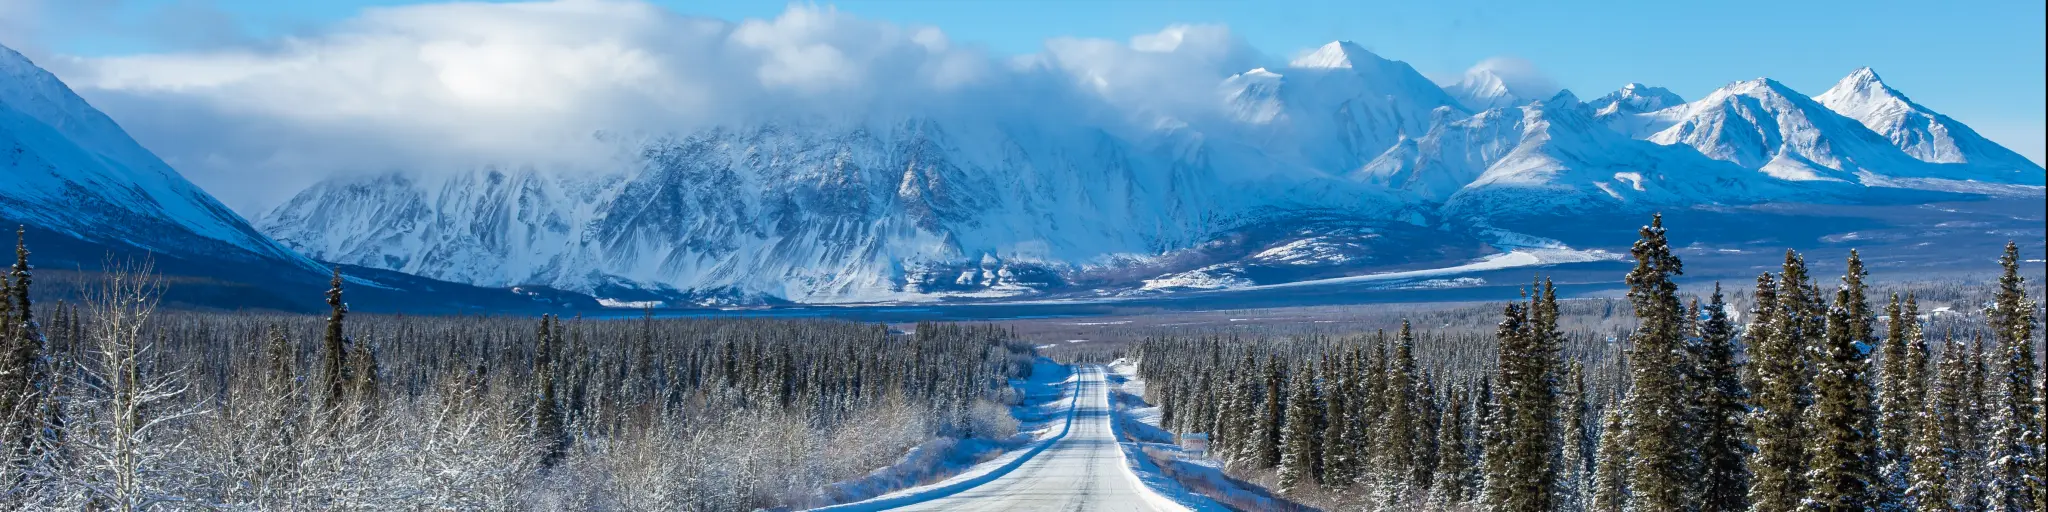 Alaska Highway through the forests of Yukon heading towards mountains in the winter